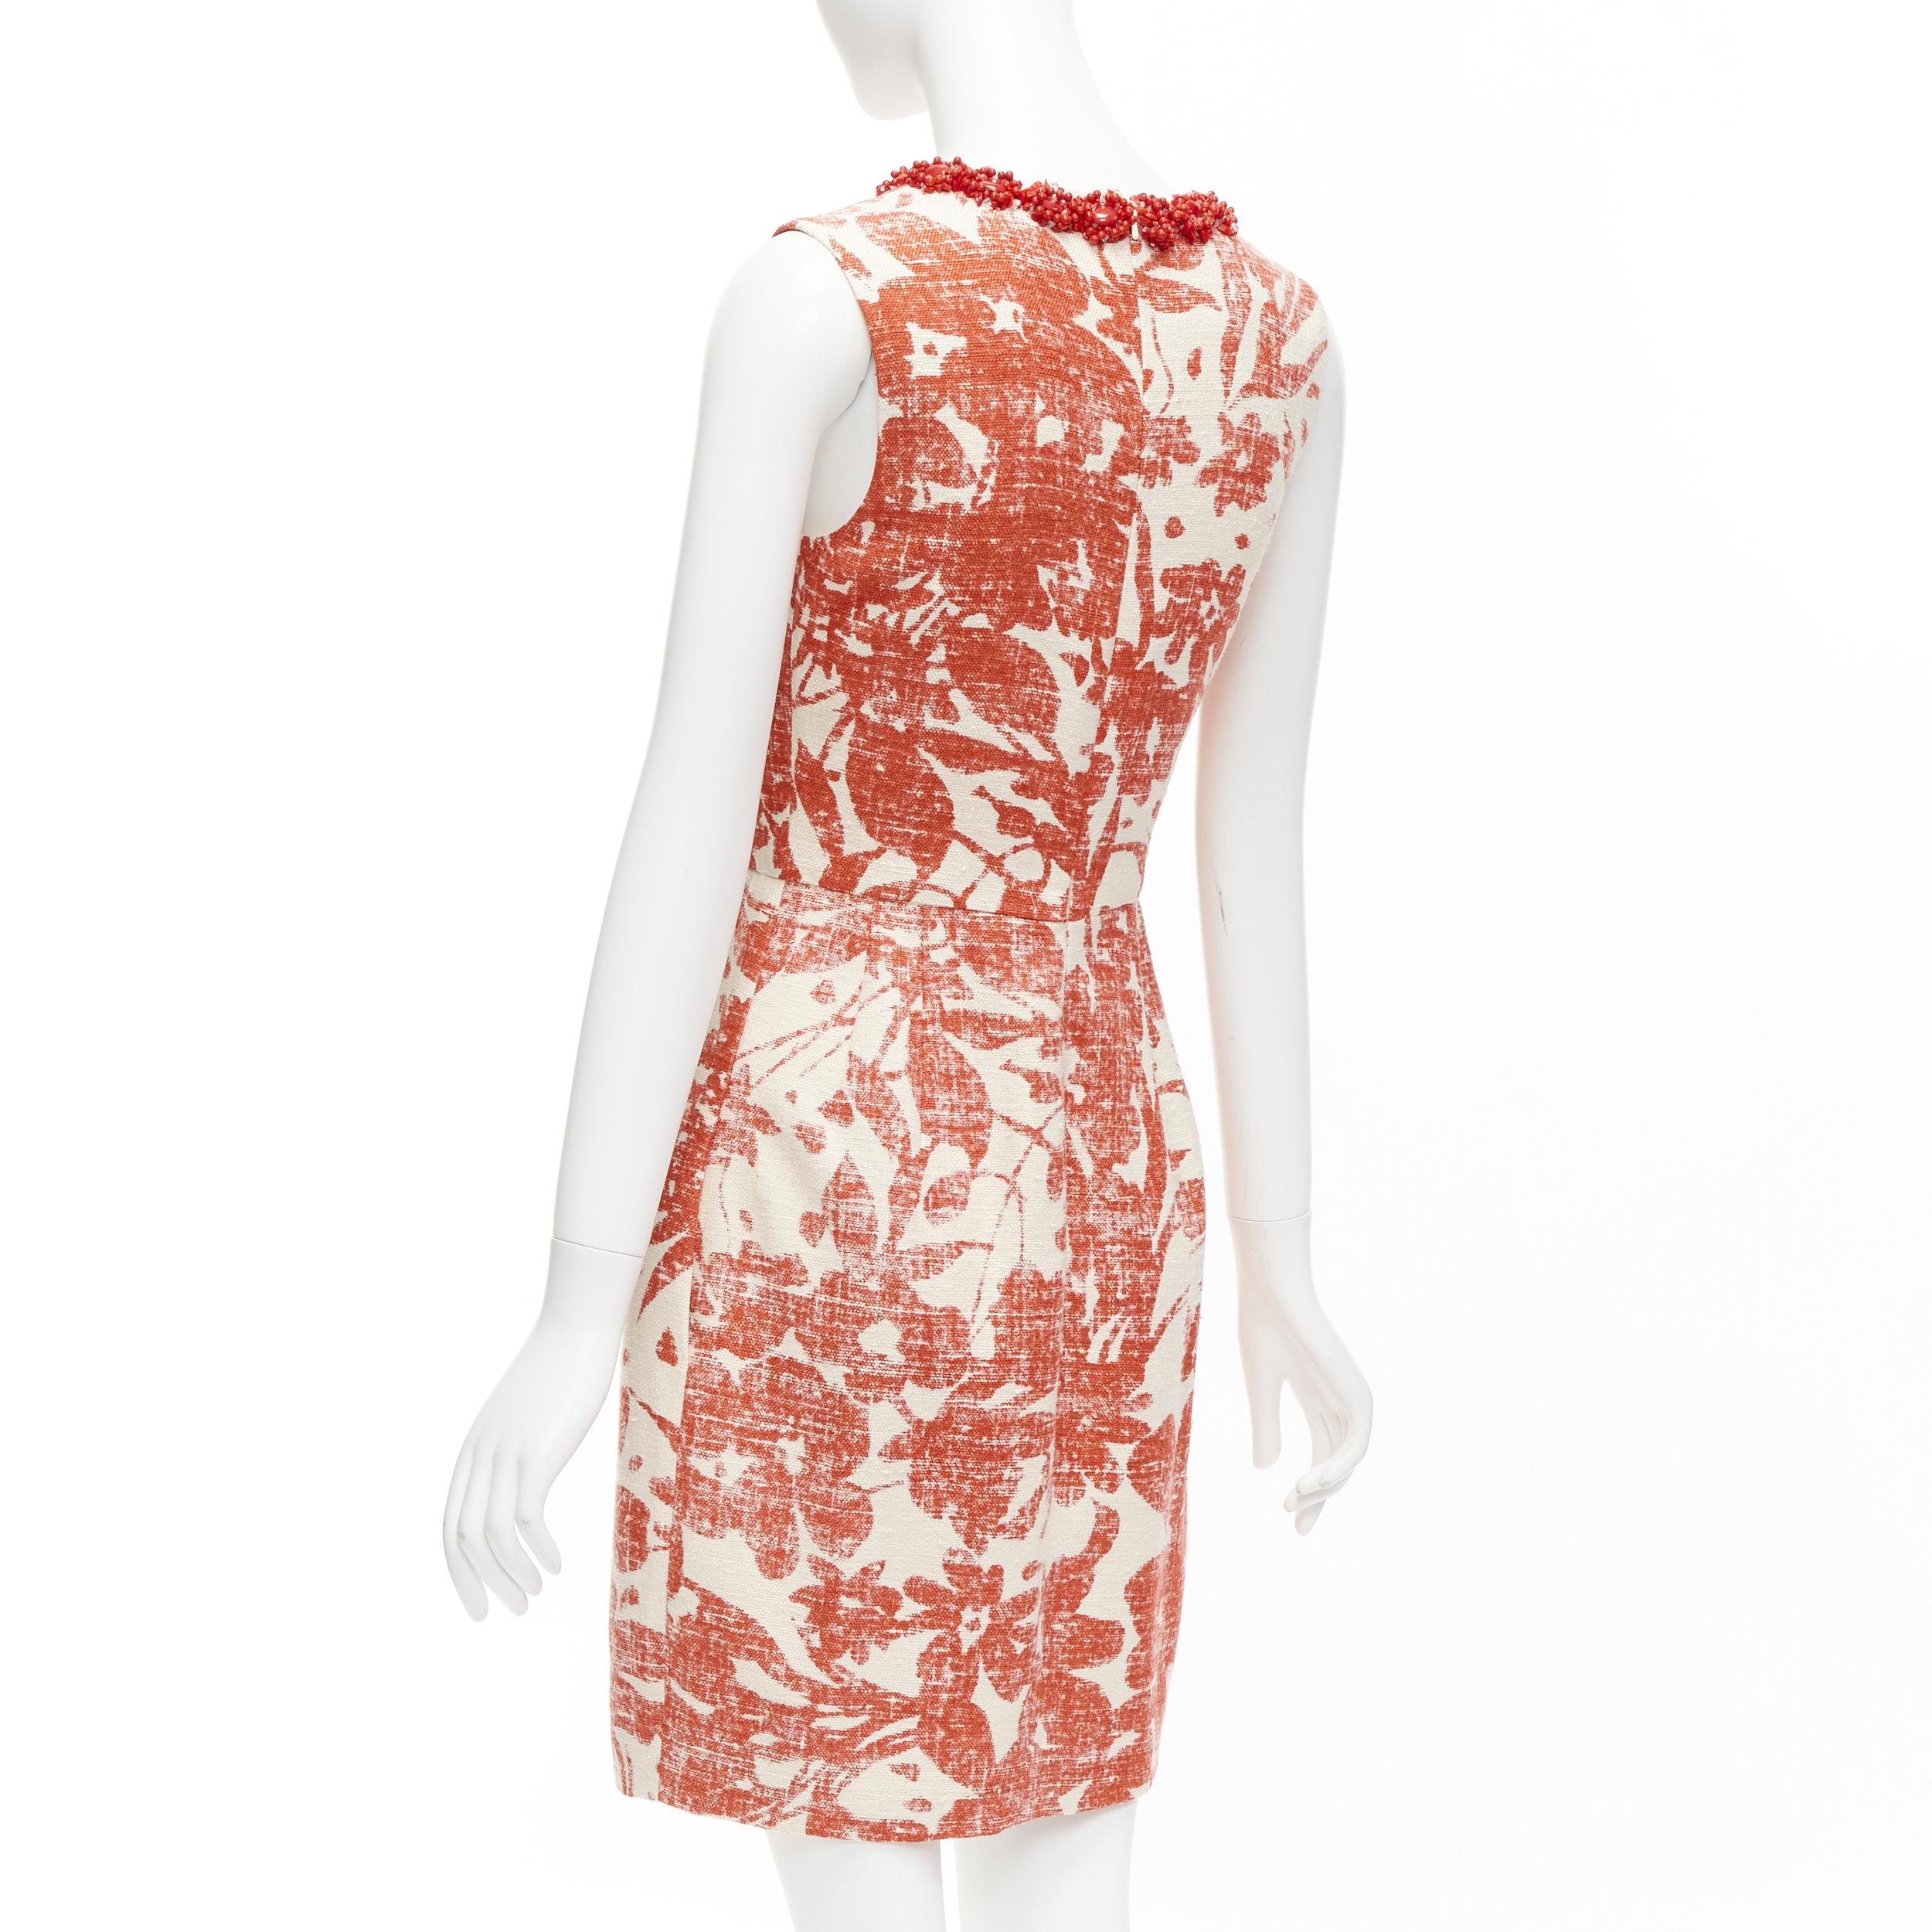 MONIQUE LHUILLIER cream red floral embellished collar sheath dress For Sale 2